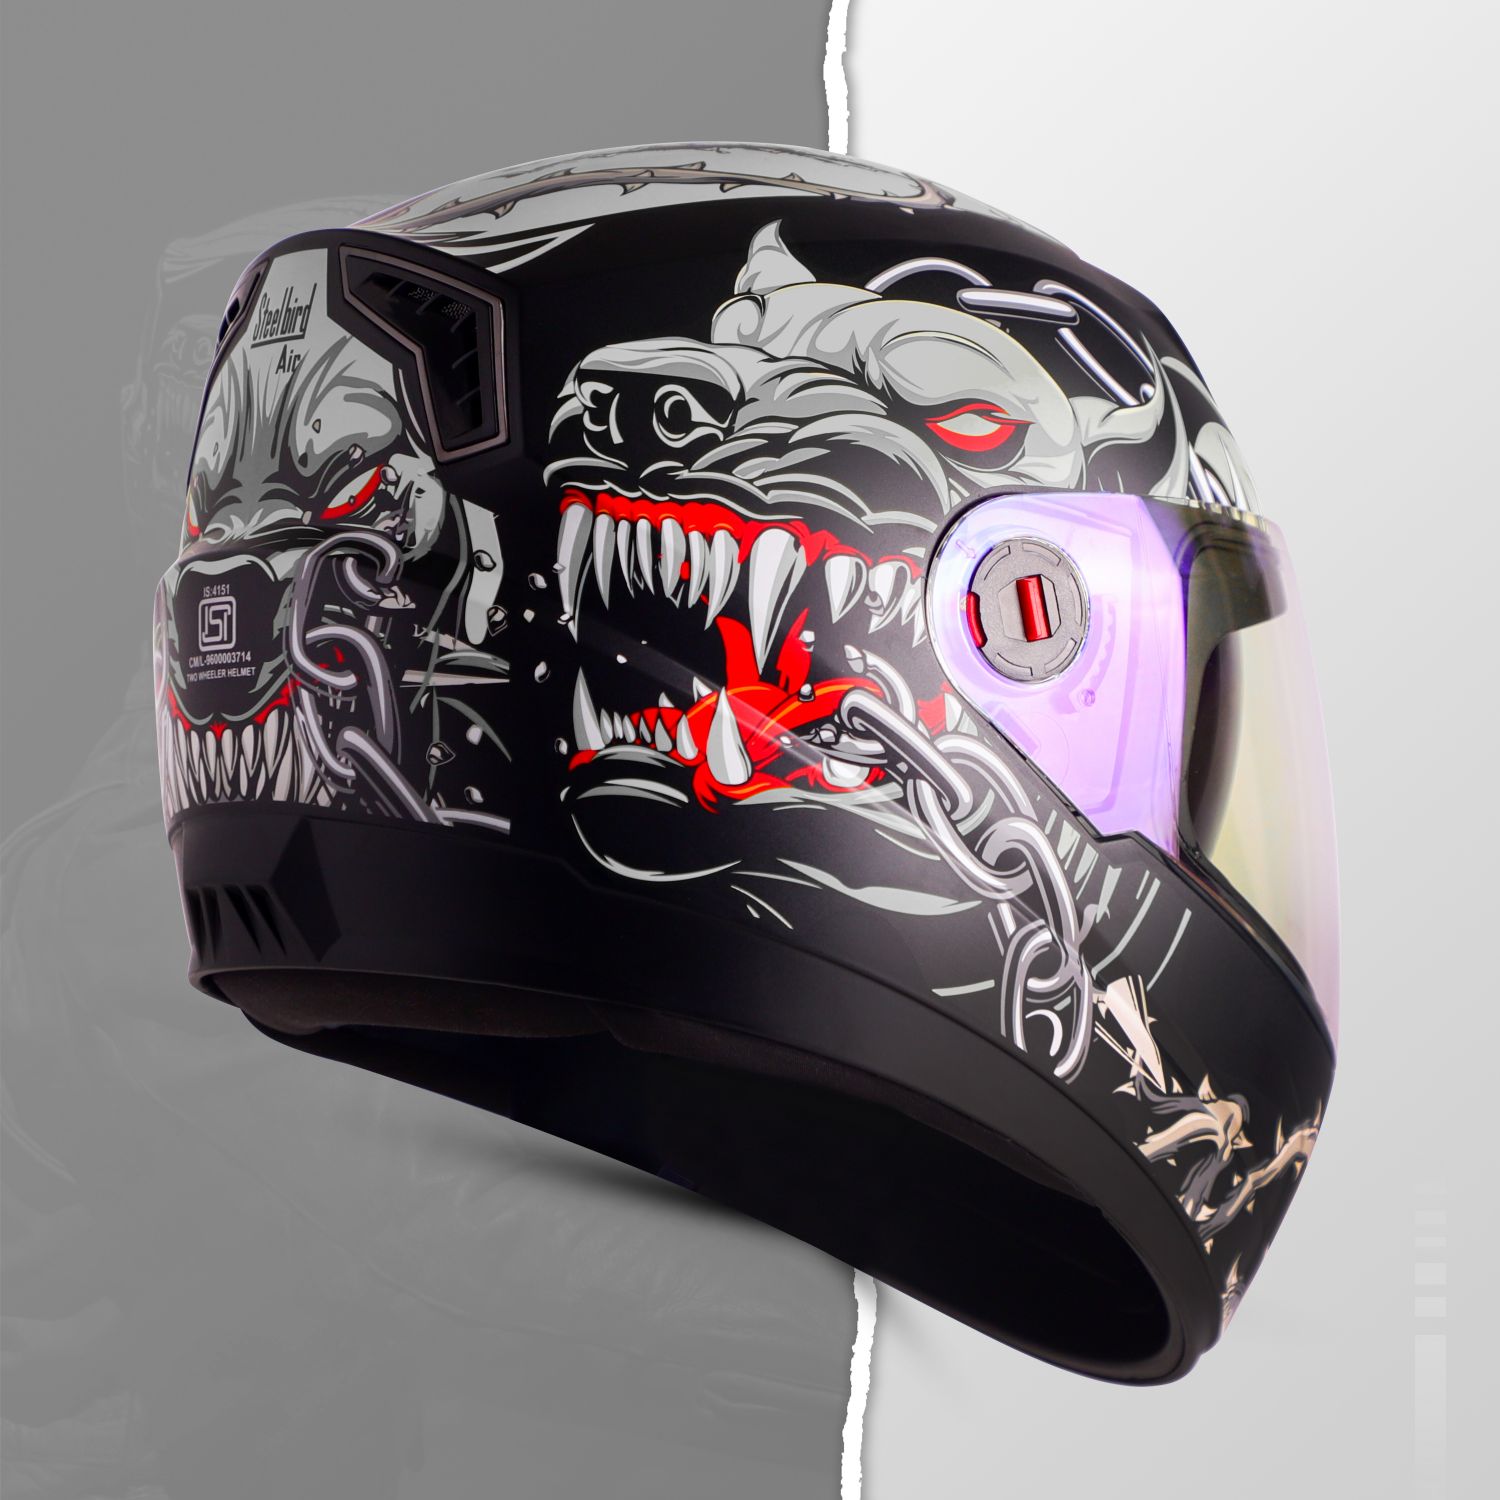 Steelbird SBA-1 Angry Dog ISI Certified Full Face Graphic Helmet For Men And Women (Glossy Black Grey With Night Vision Blue Visor)